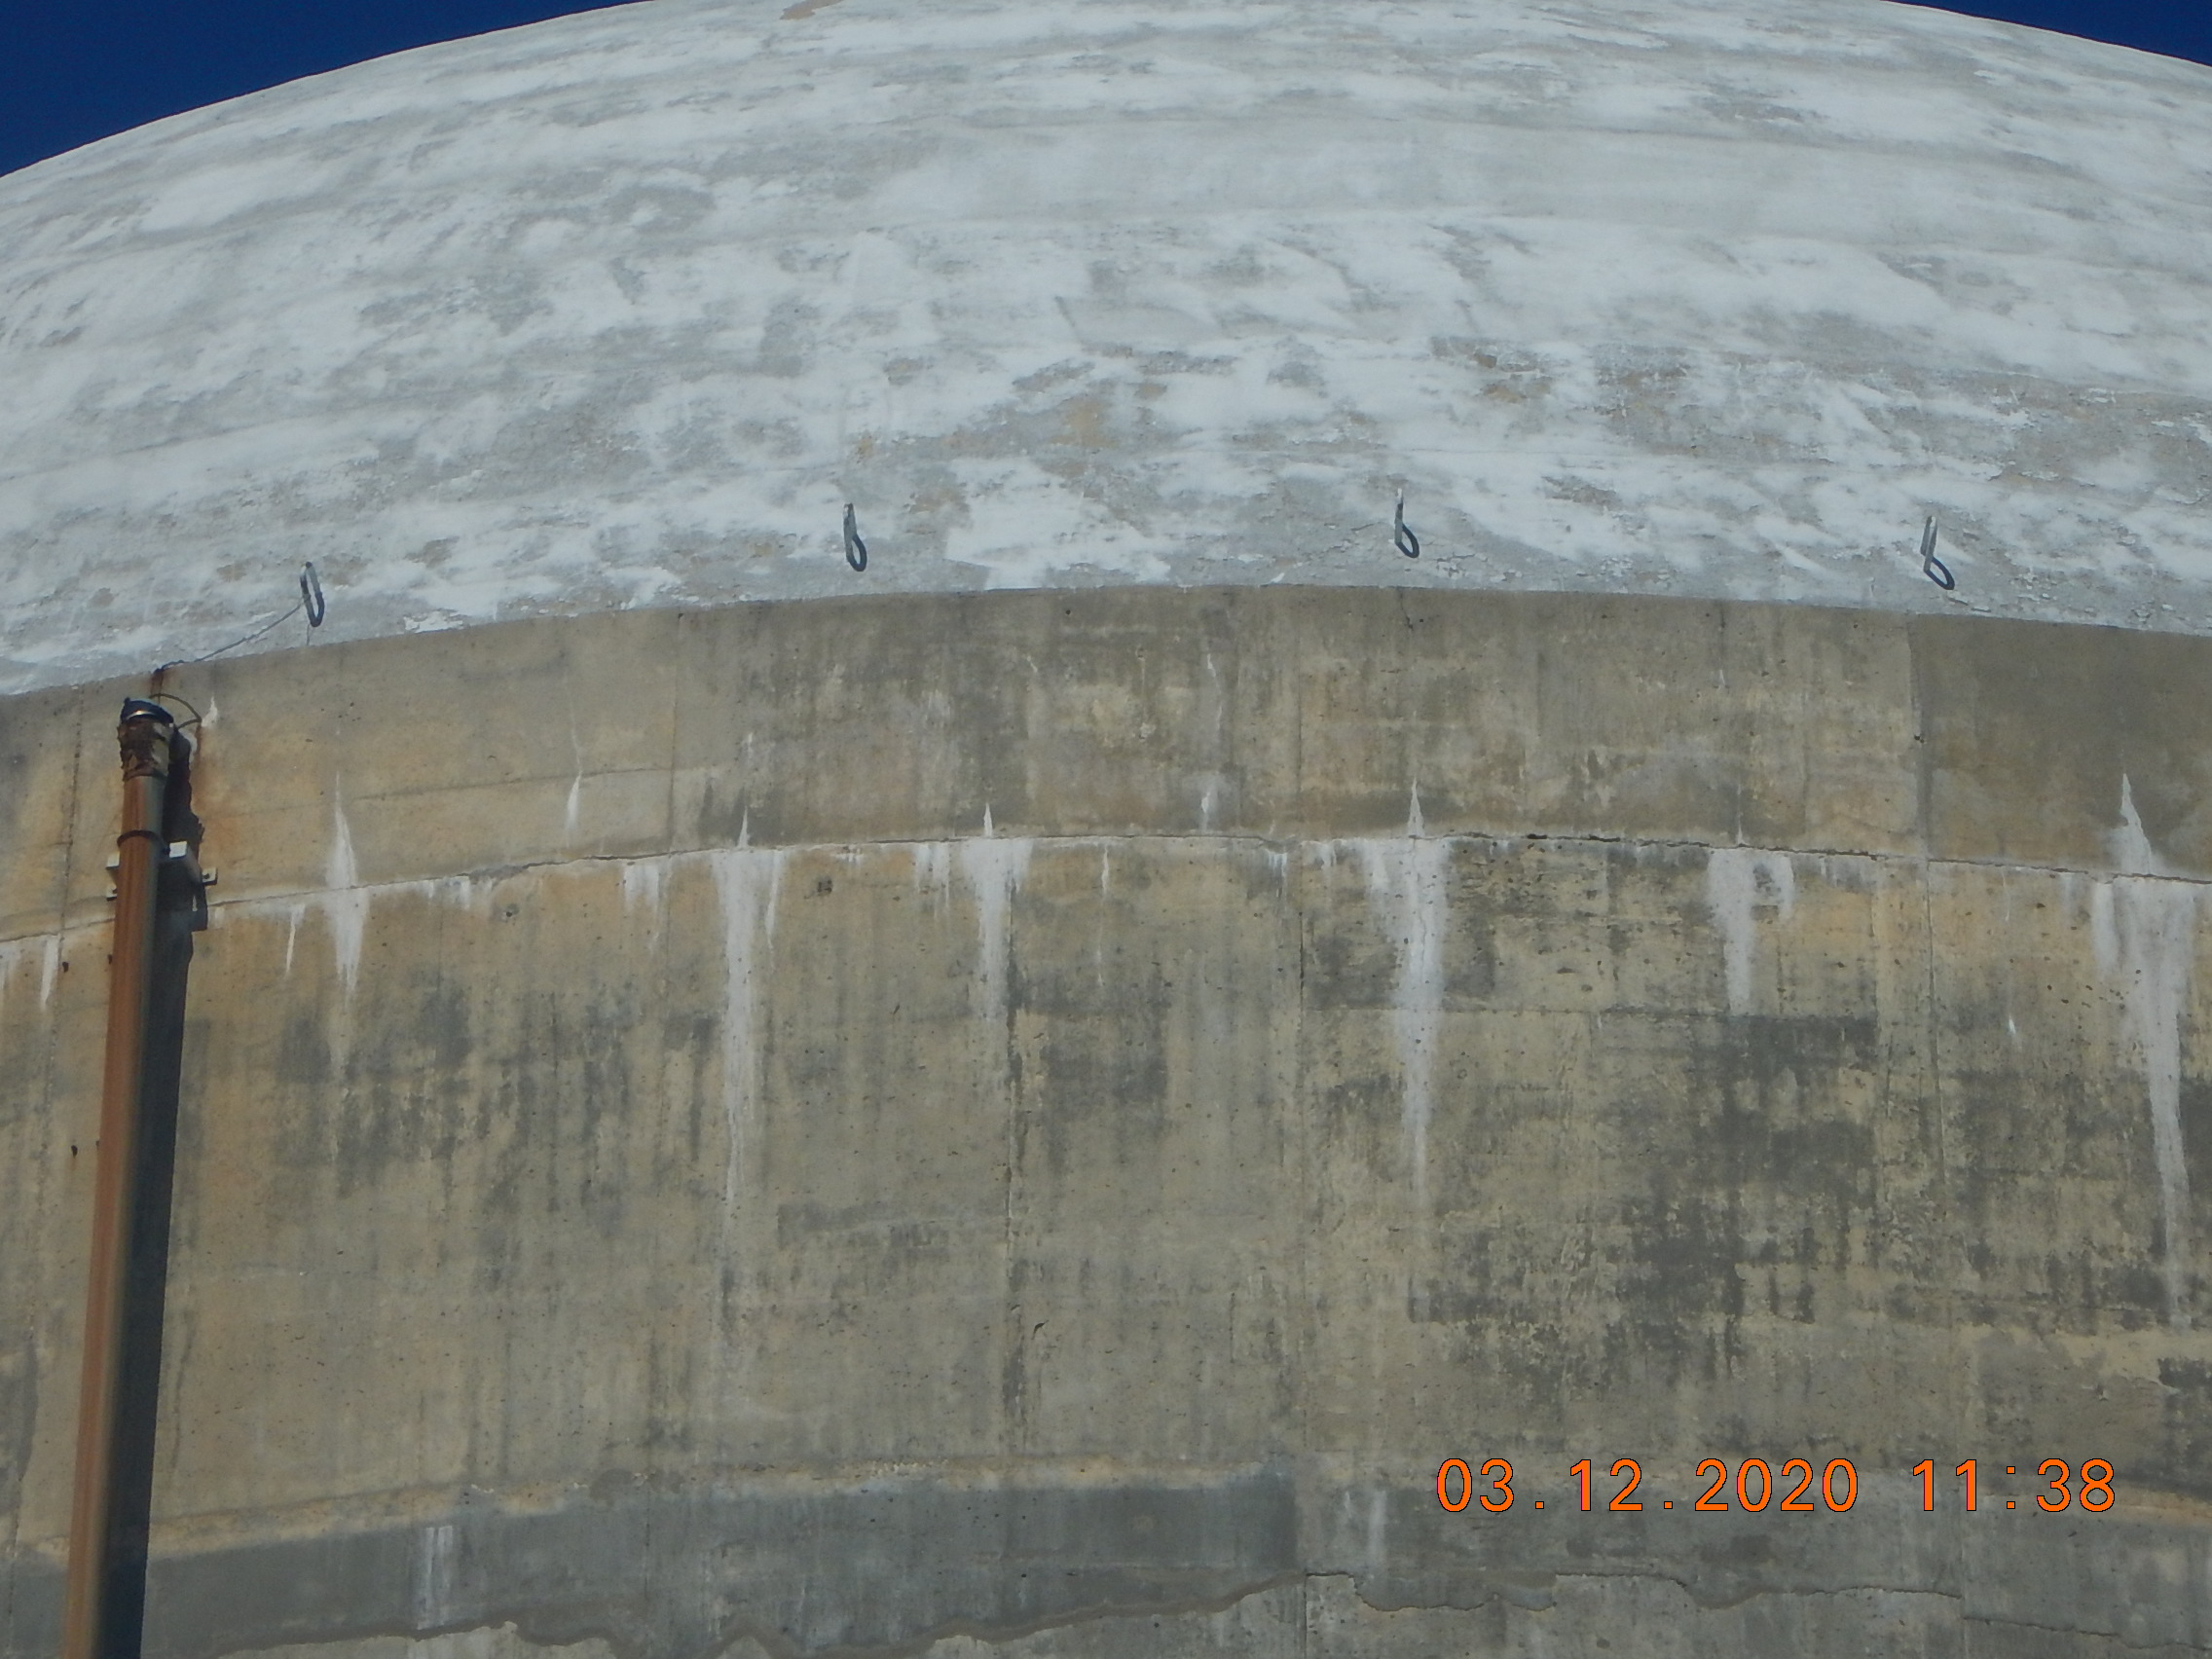 the wall of the container vessel at the Robinson Nuclear Plant.